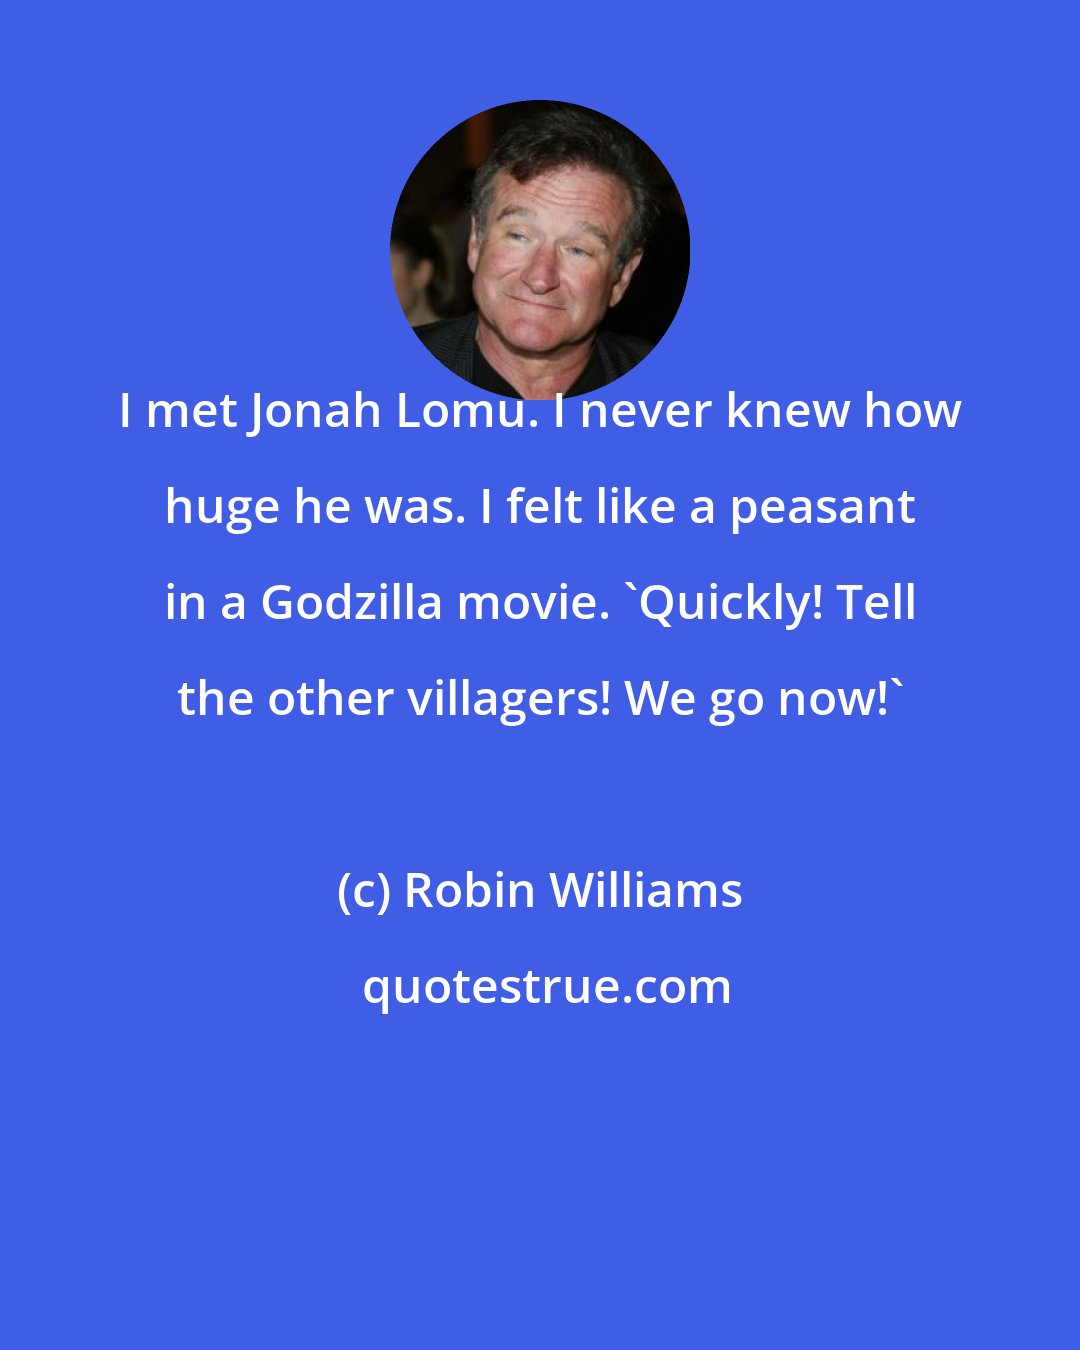 Robin Williams: I met Jonah Lomu. I never knew how huge he was. I felt like a peasant in a Godzilla movie. 'Quickly! Tell the other villagers! We go now!'